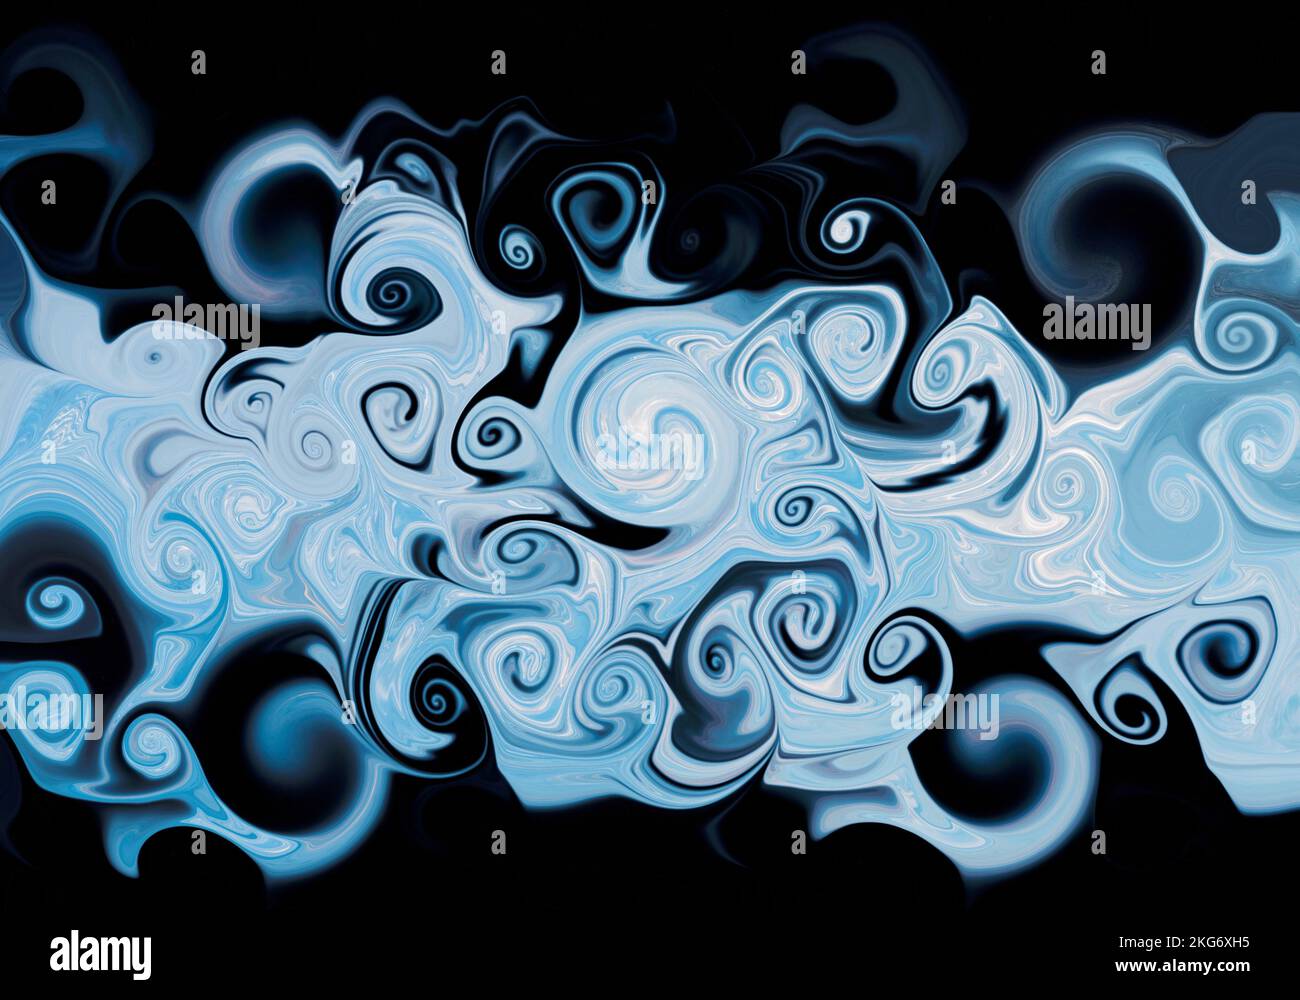 Abstract light blue and white fluid liquid swirling marble texture on black background or wallpaper Stock Photo